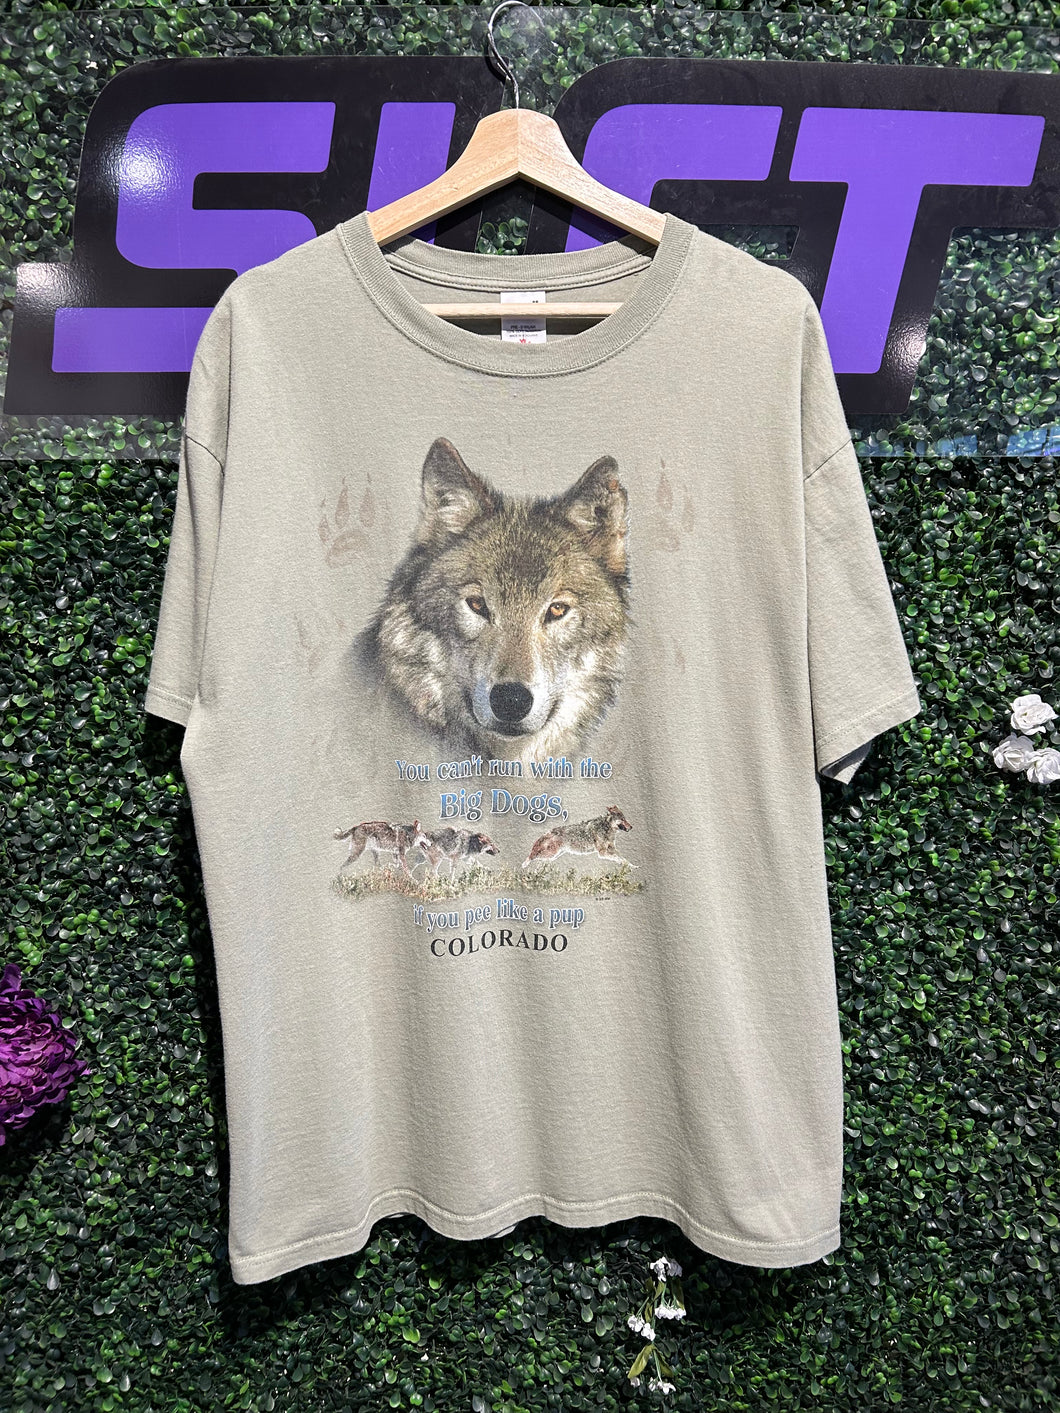 Vintage Run With The Big Dogs Wolf T-Shirt. Size XL